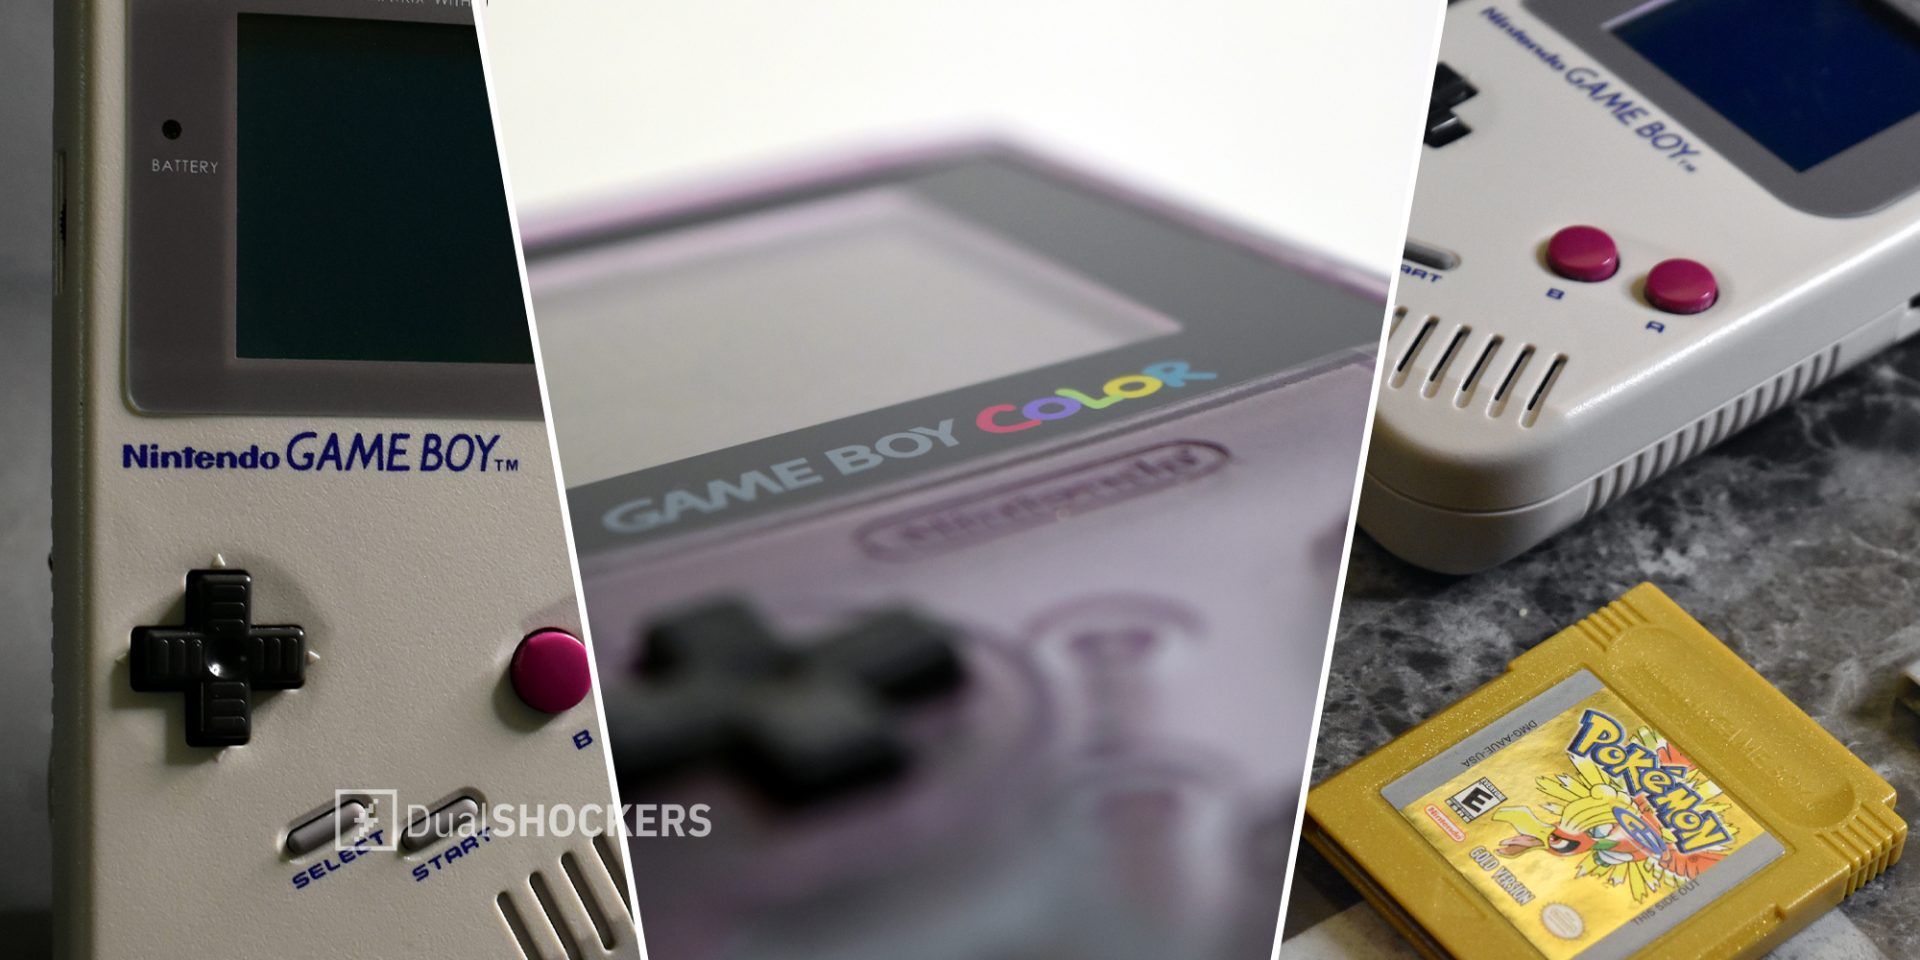 Nintendo Game Boy DMG on left, Game Boy Color Atomic Purple close up in middle, Game Boy with Pokemon Gold game on right